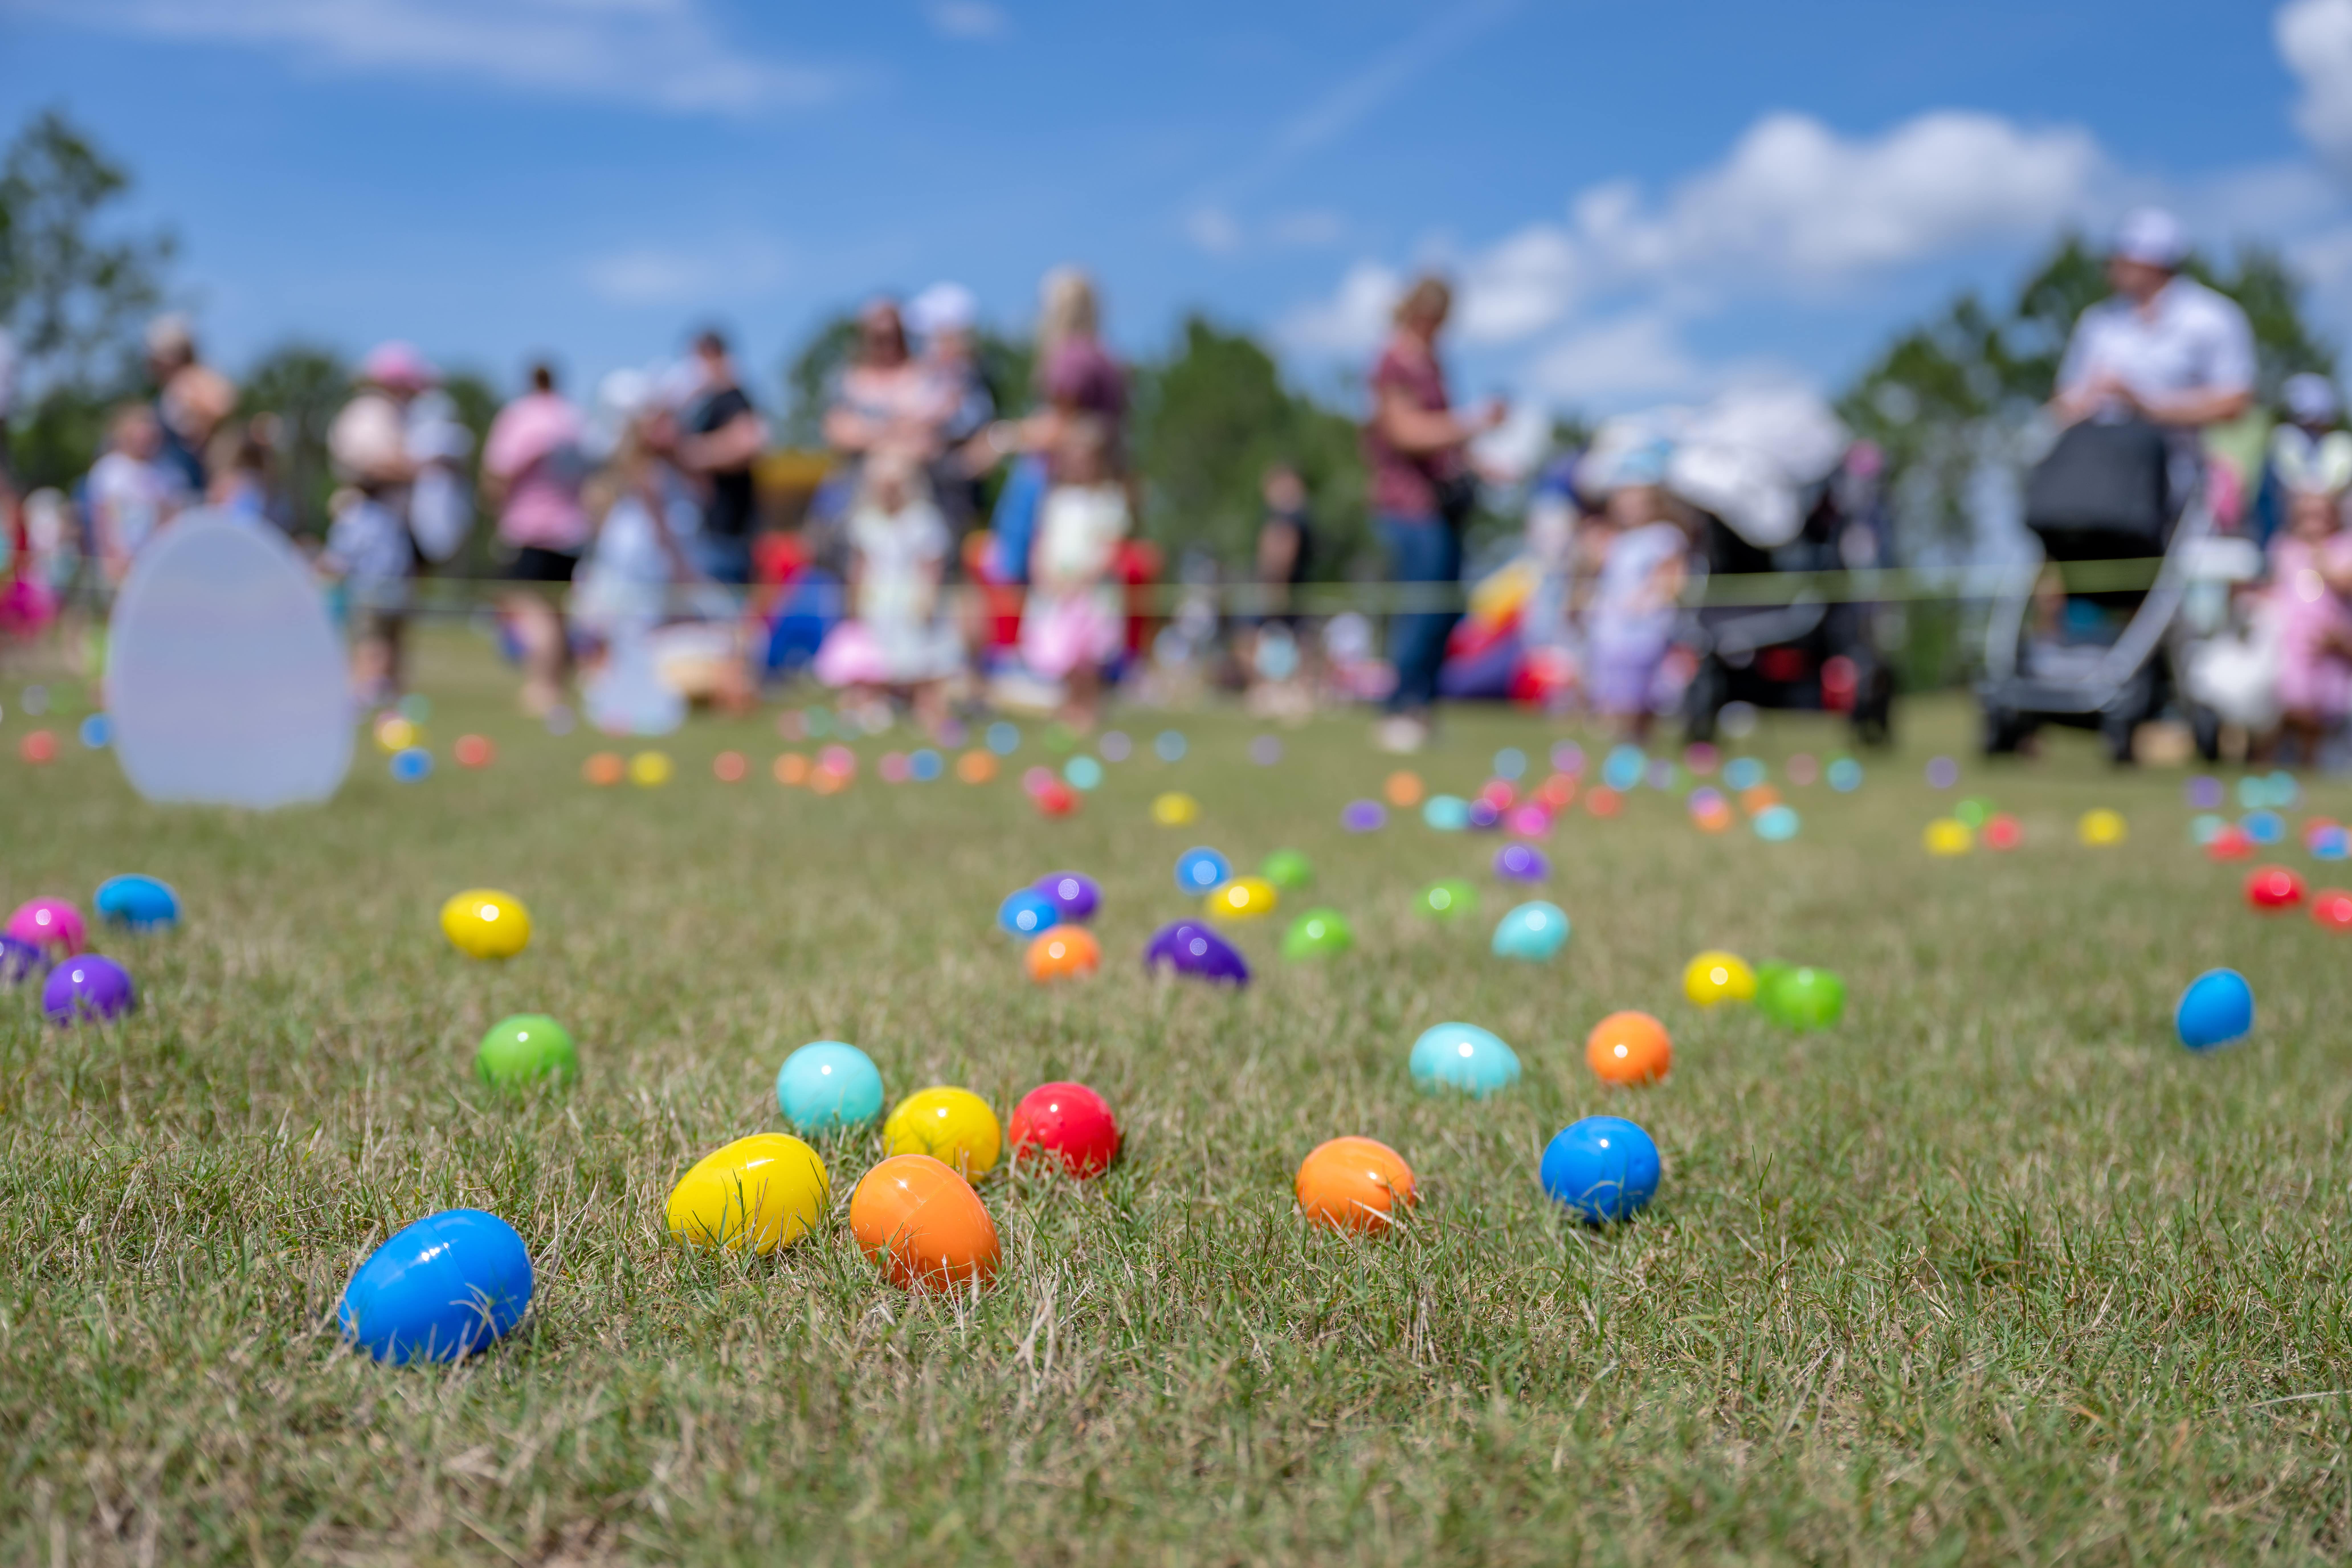 A field filled with brightly coloured Easter eggs scattered over the grass in the background is a line of children and parents with prams waiting to begin their Easter hunt.